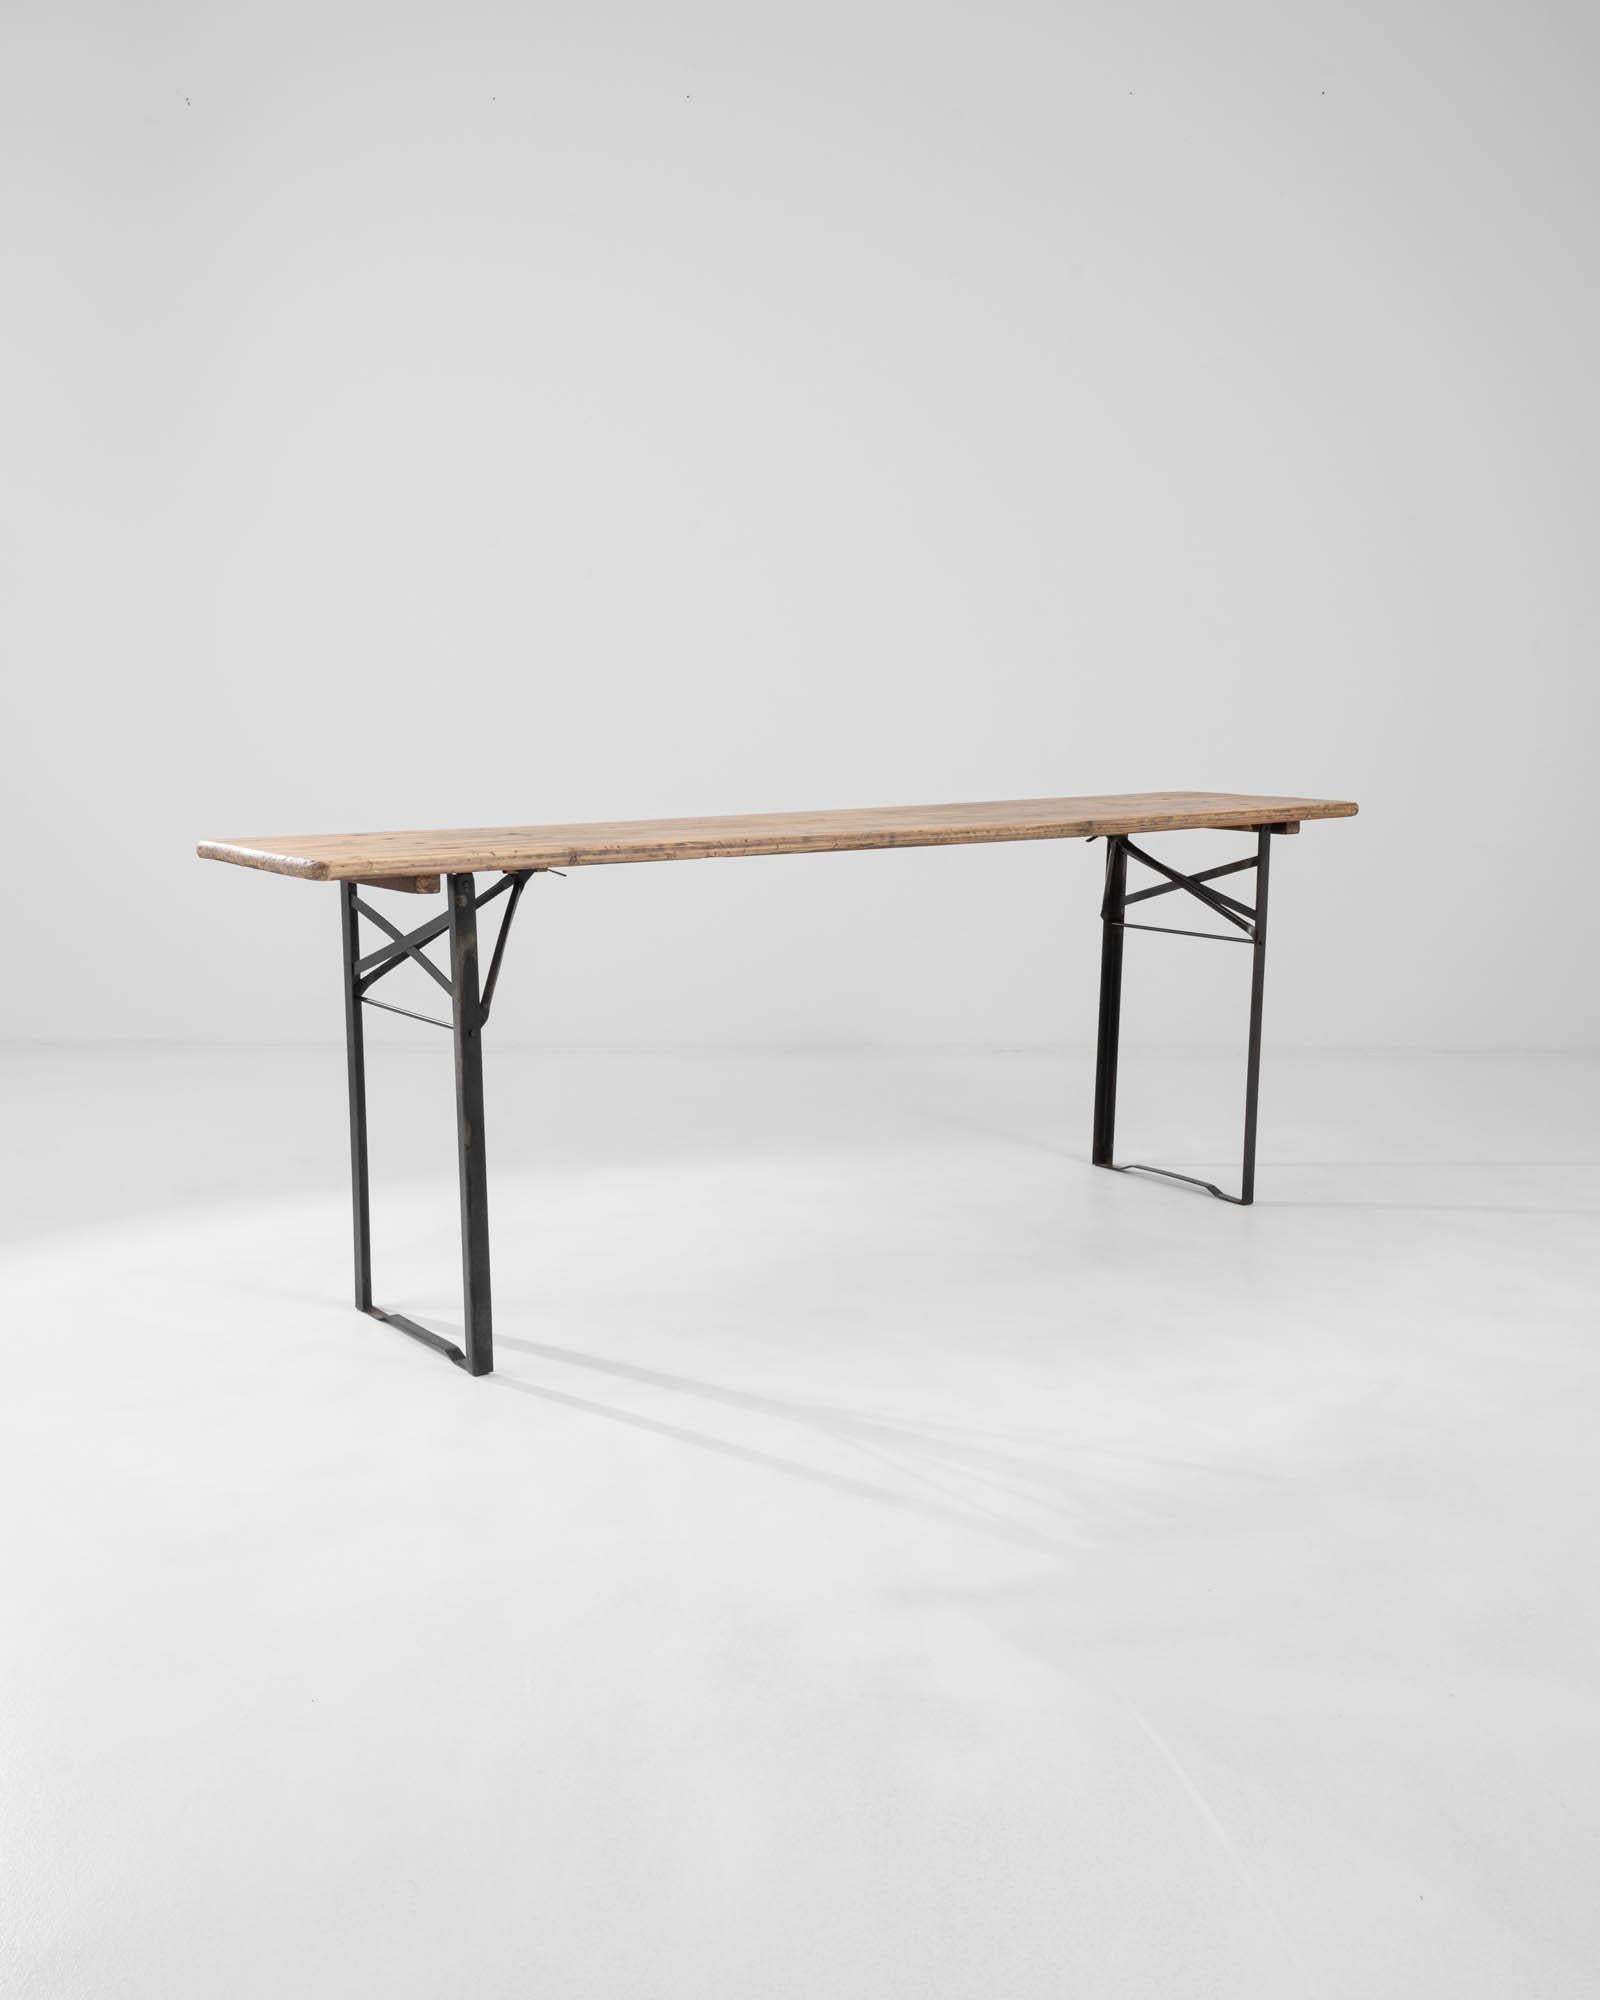 A metal table with a wooden top created in 20th century France. Spry and wiry, this crafty table exudes a sense of industrious yet handmade creativity. Metal elements are welded together in a geometric network buttressing each end of the table,